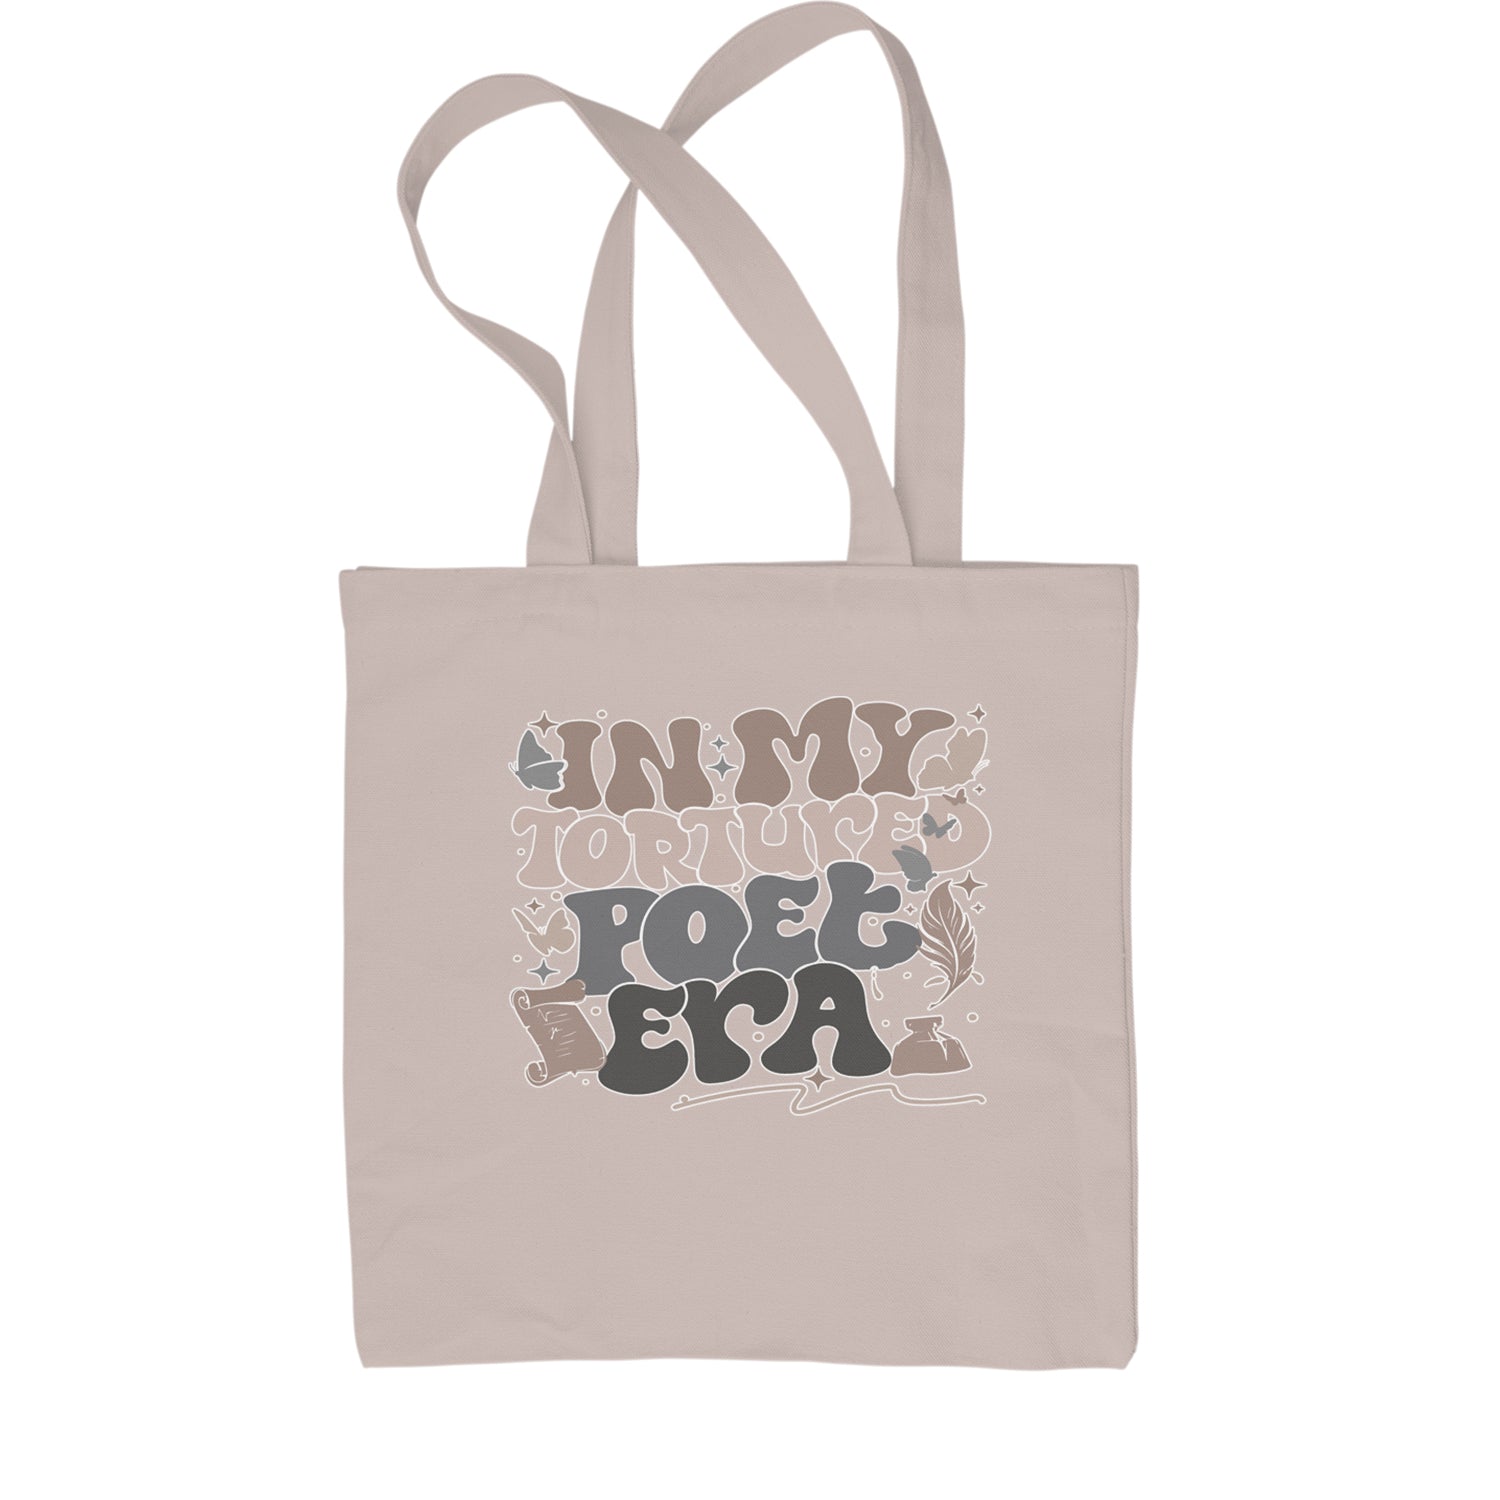 In My Tortured Poet Era TTPD Music Shopping Tote Bag